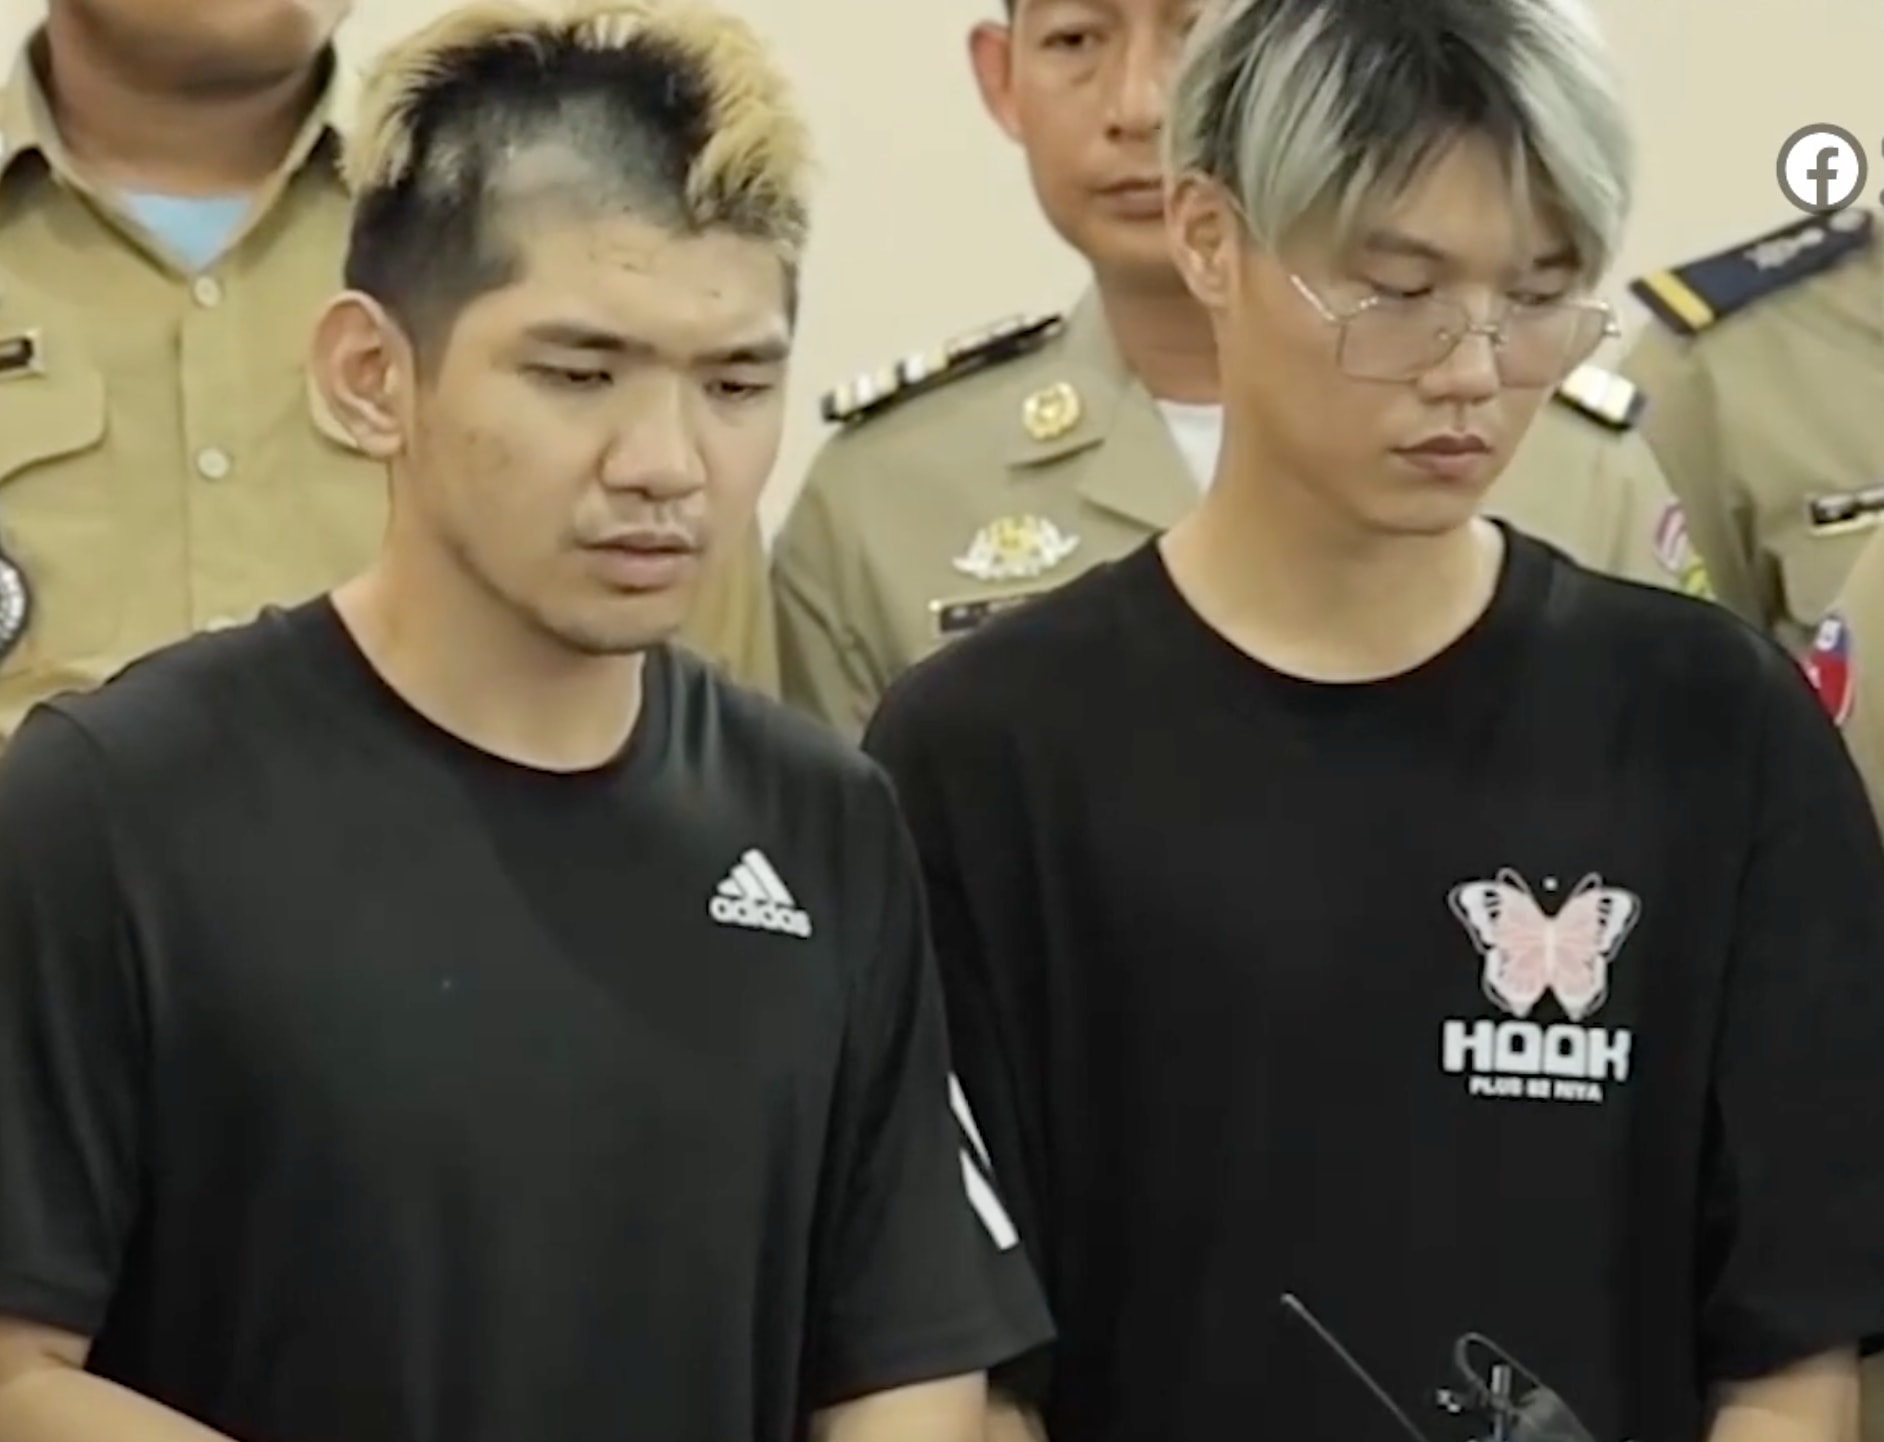 Taiwanese Influencers Sentenced To 2 Years’ Jail In Cambodia For Faking Assault In The Country